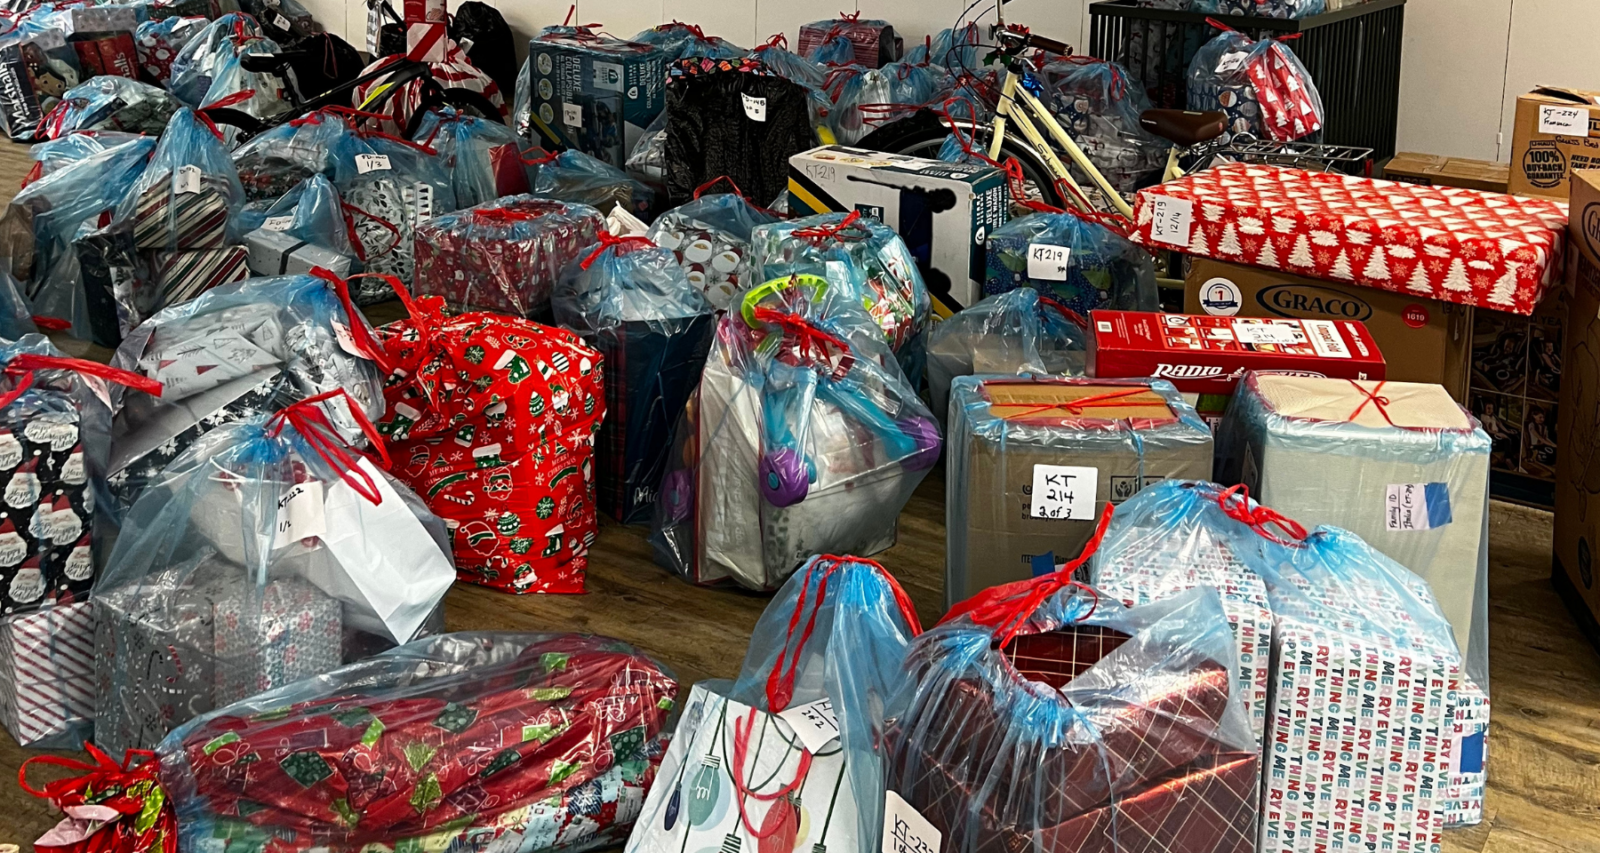 Thousands of gifts for Santa Cruz County families are bagged and waiting for pick up at the Volunteer Center's Adopt-a-Family Donation Center.